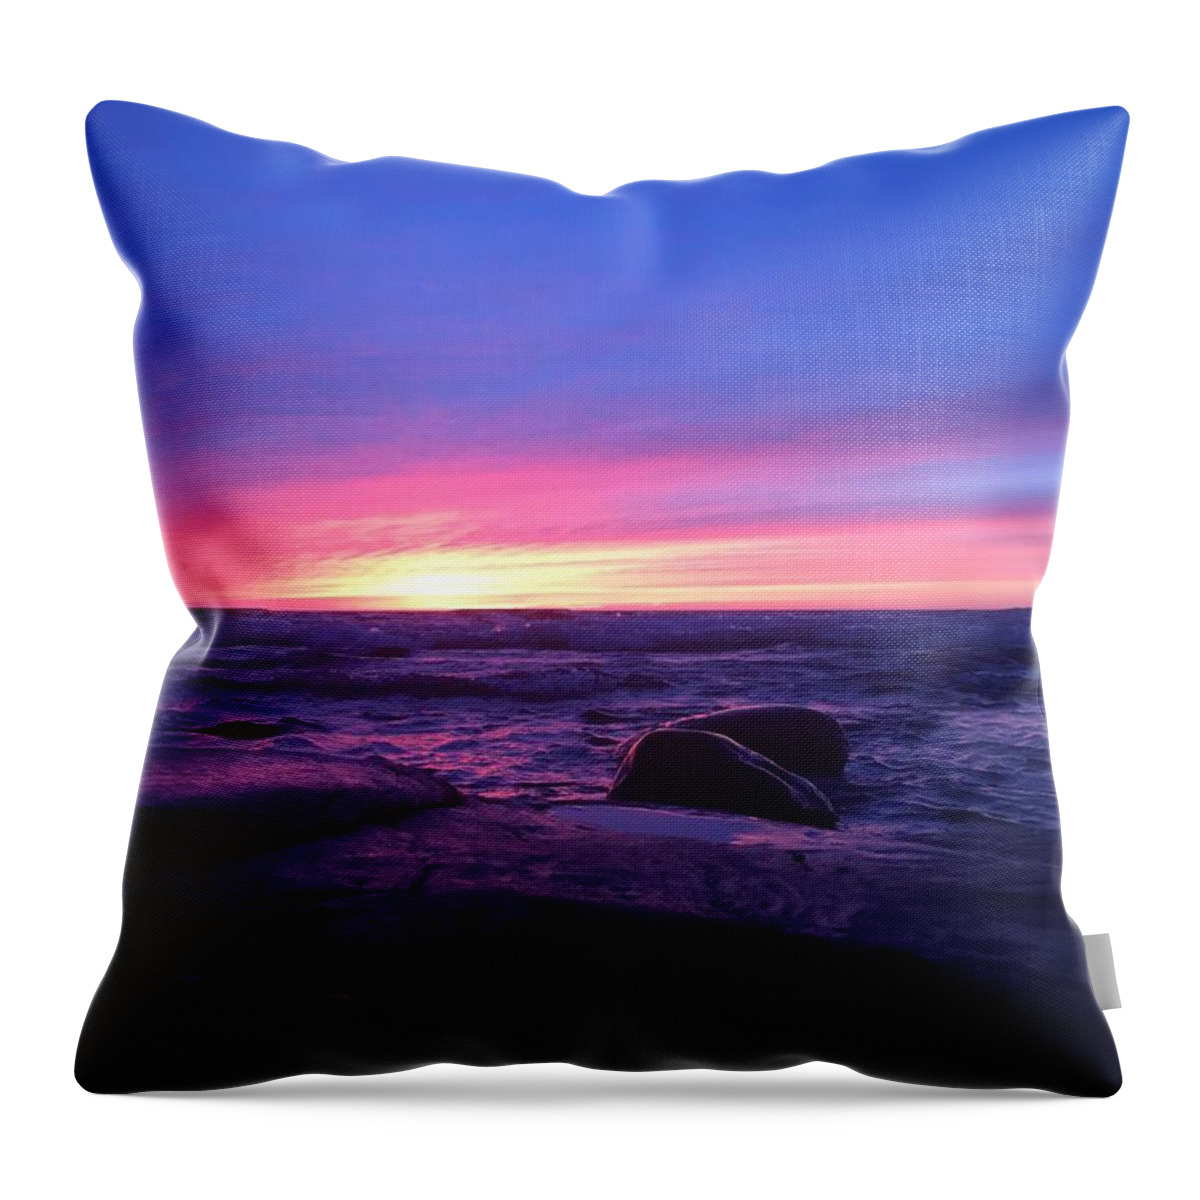 Lake Superior At Dusk Throw Pillow featuring the photograph Forever by Paula Brown